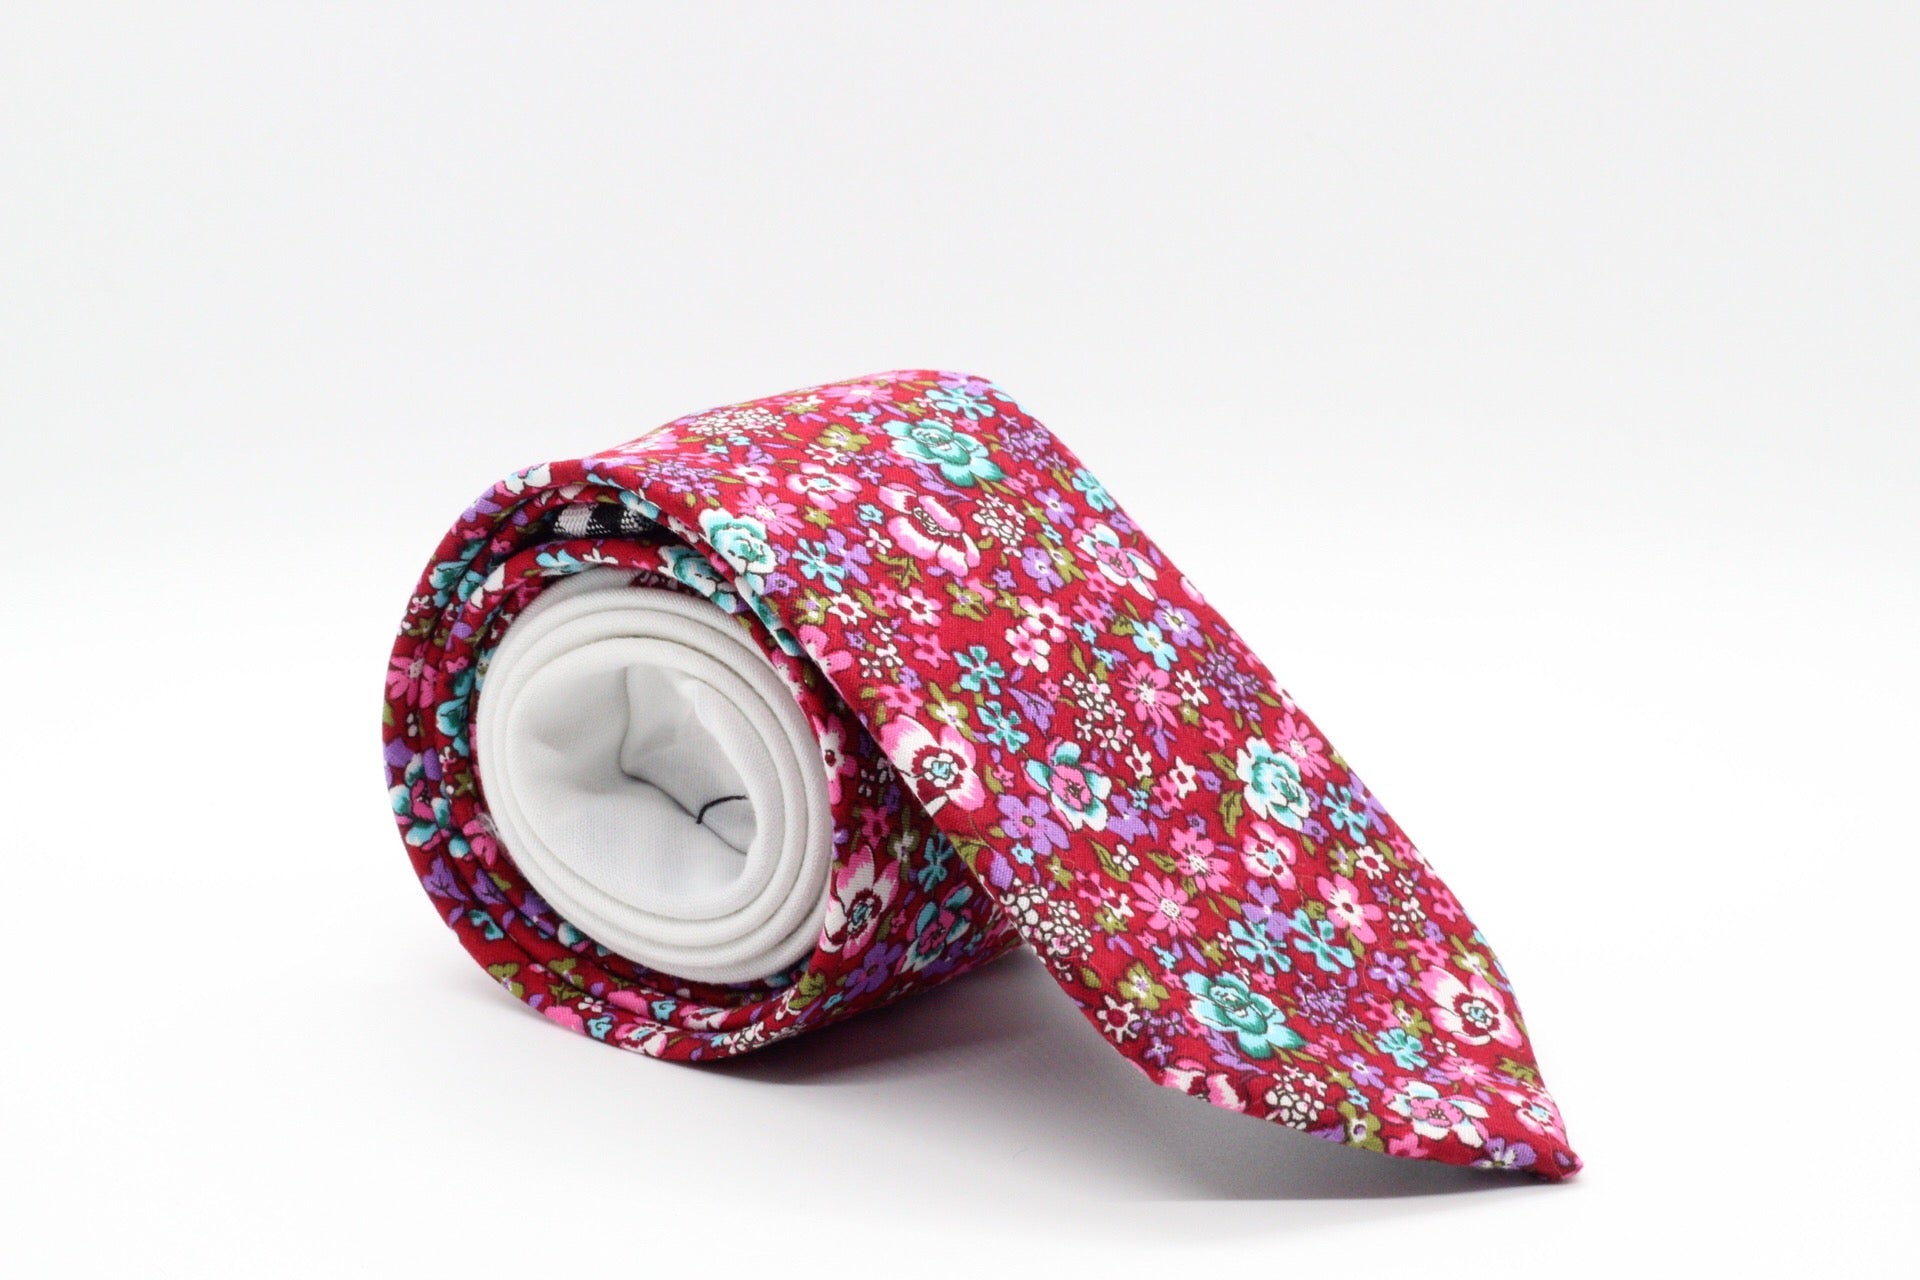 The Quilted Floral Tie